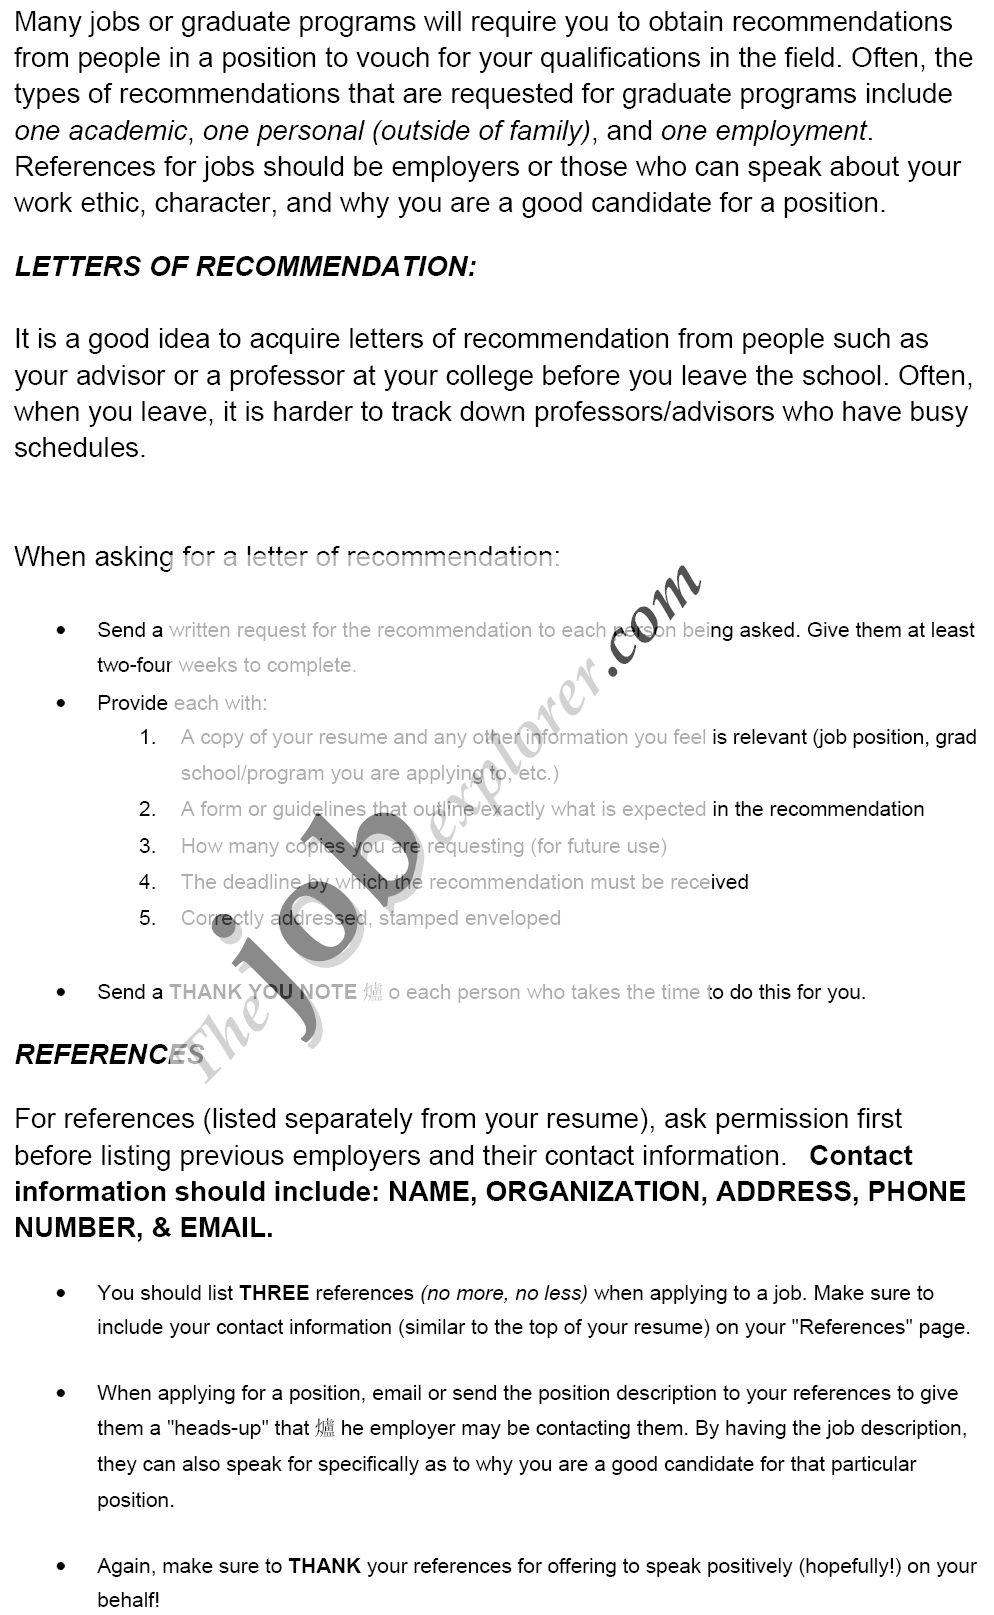 Leadership Letter Of Recommendation Template from www.thejobexplorer.com